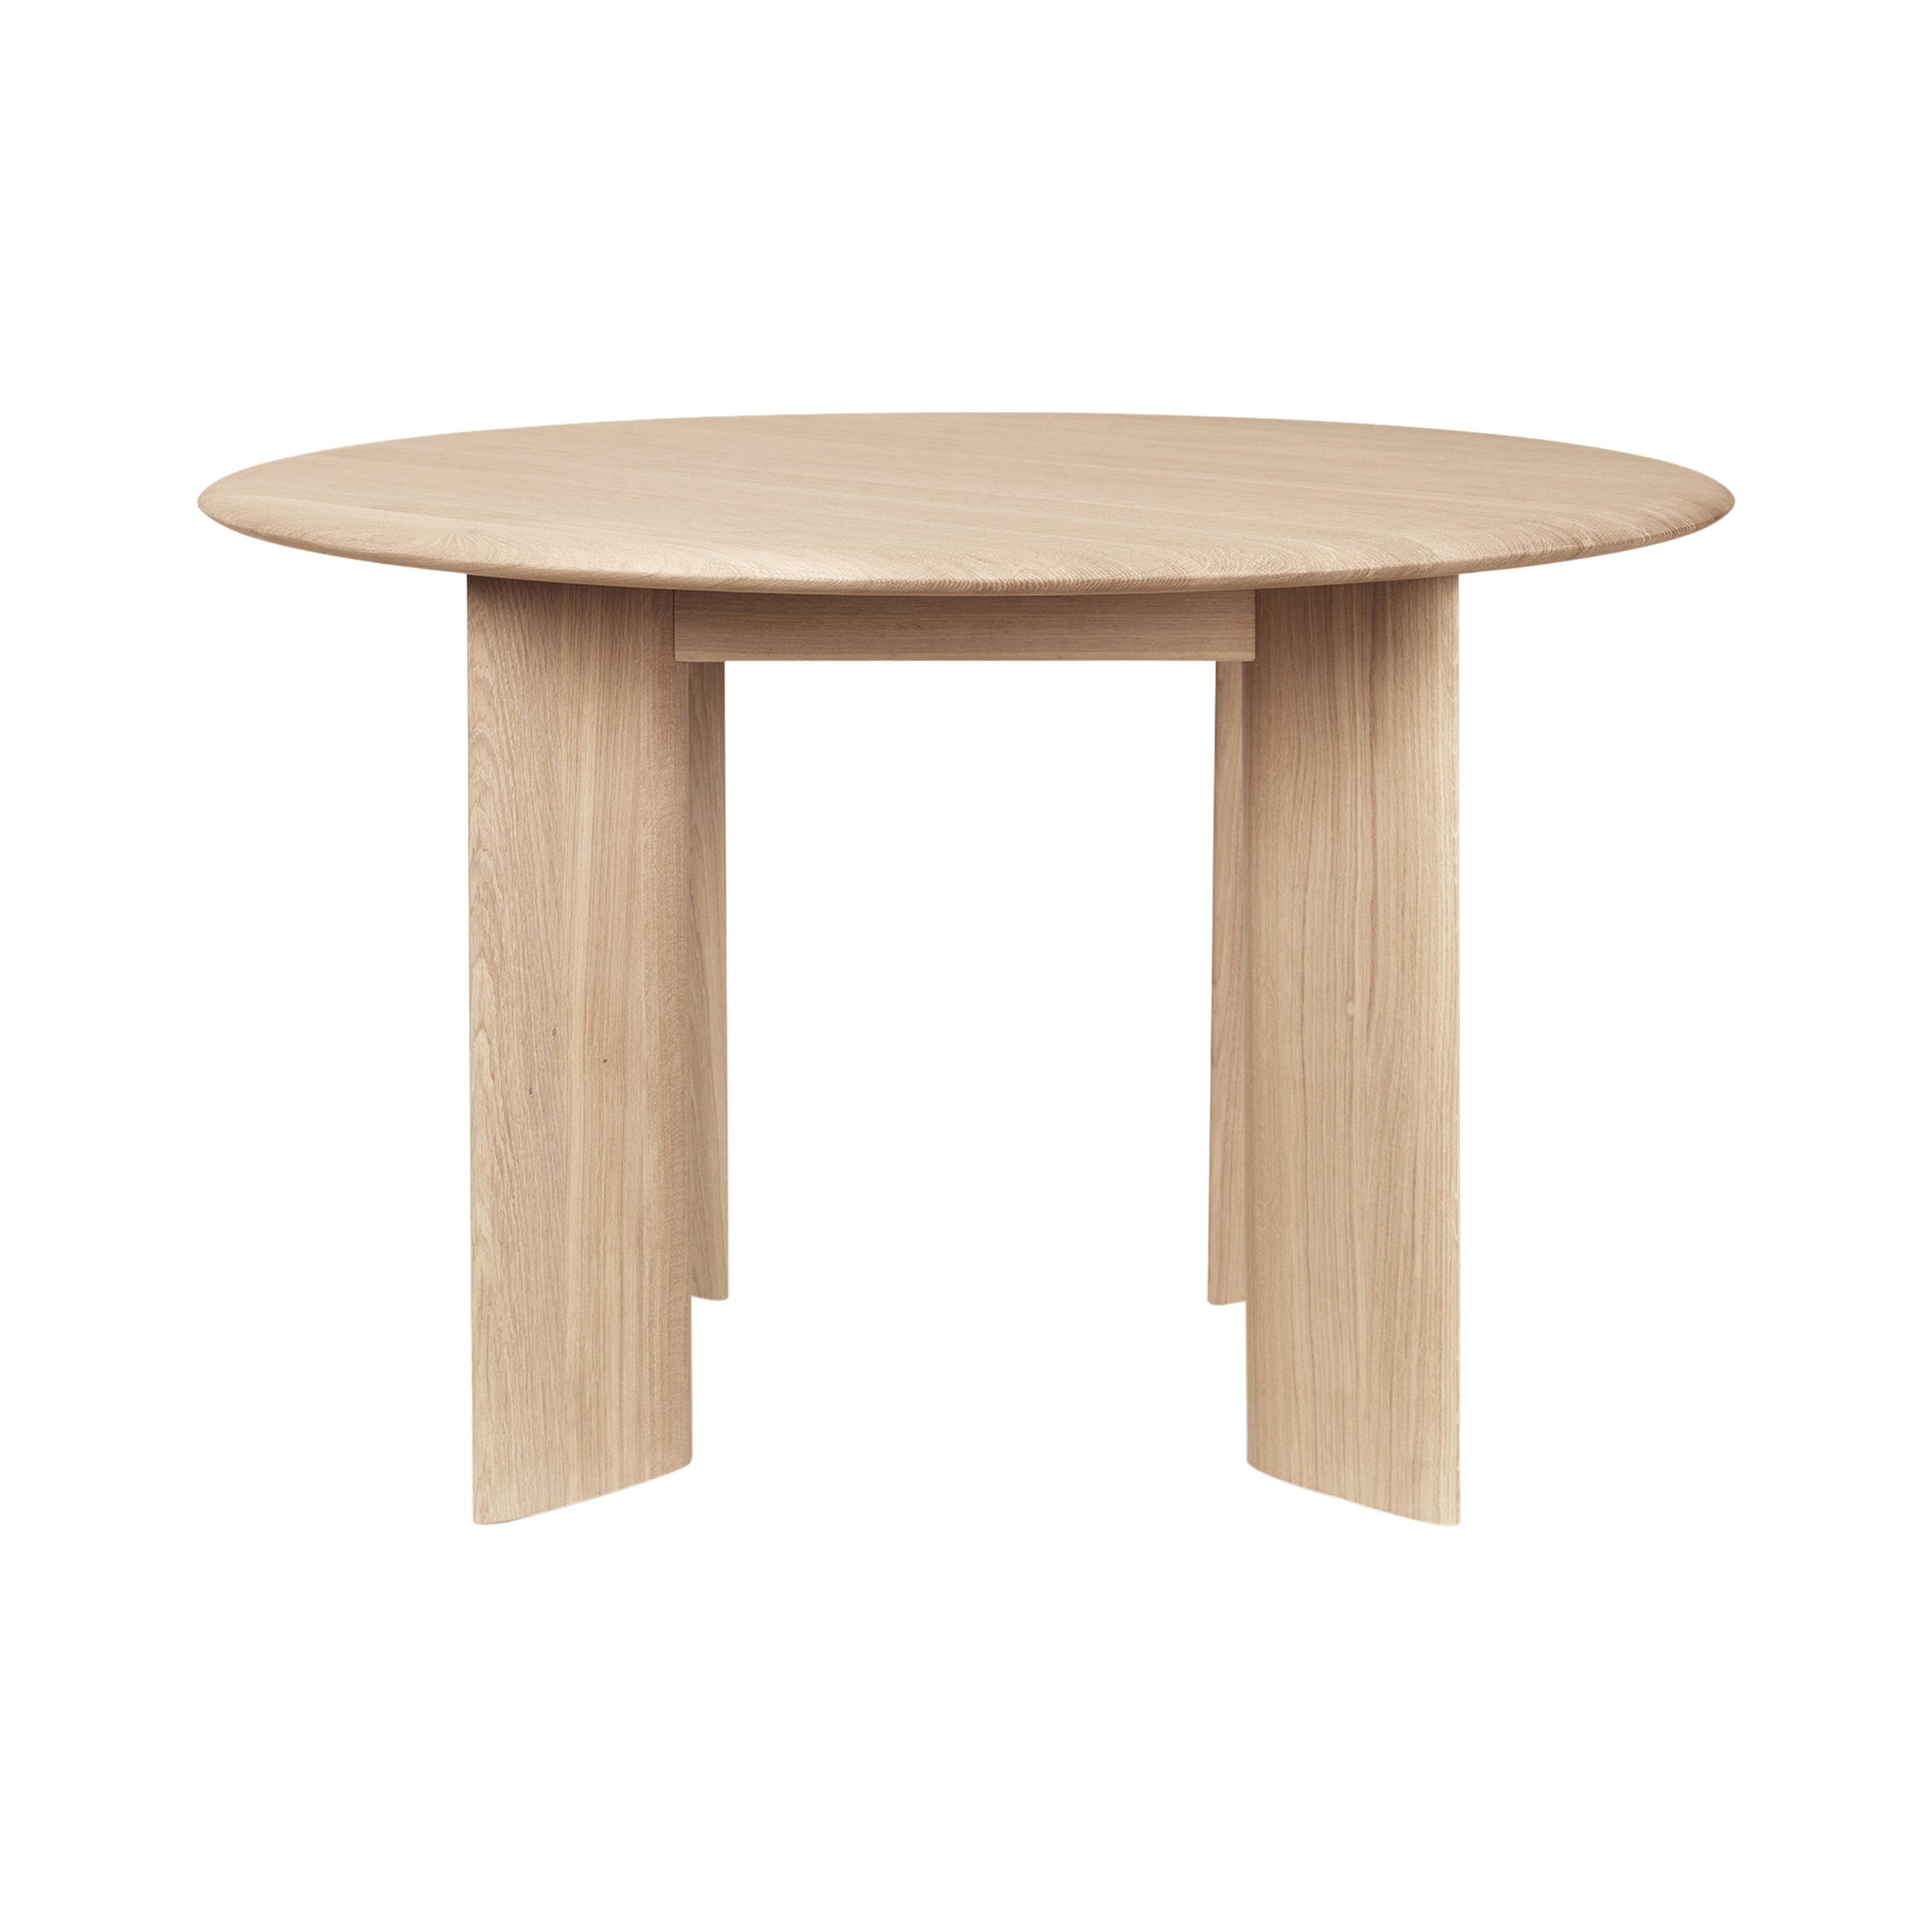 Bevel Round Table: White Oiled Beech